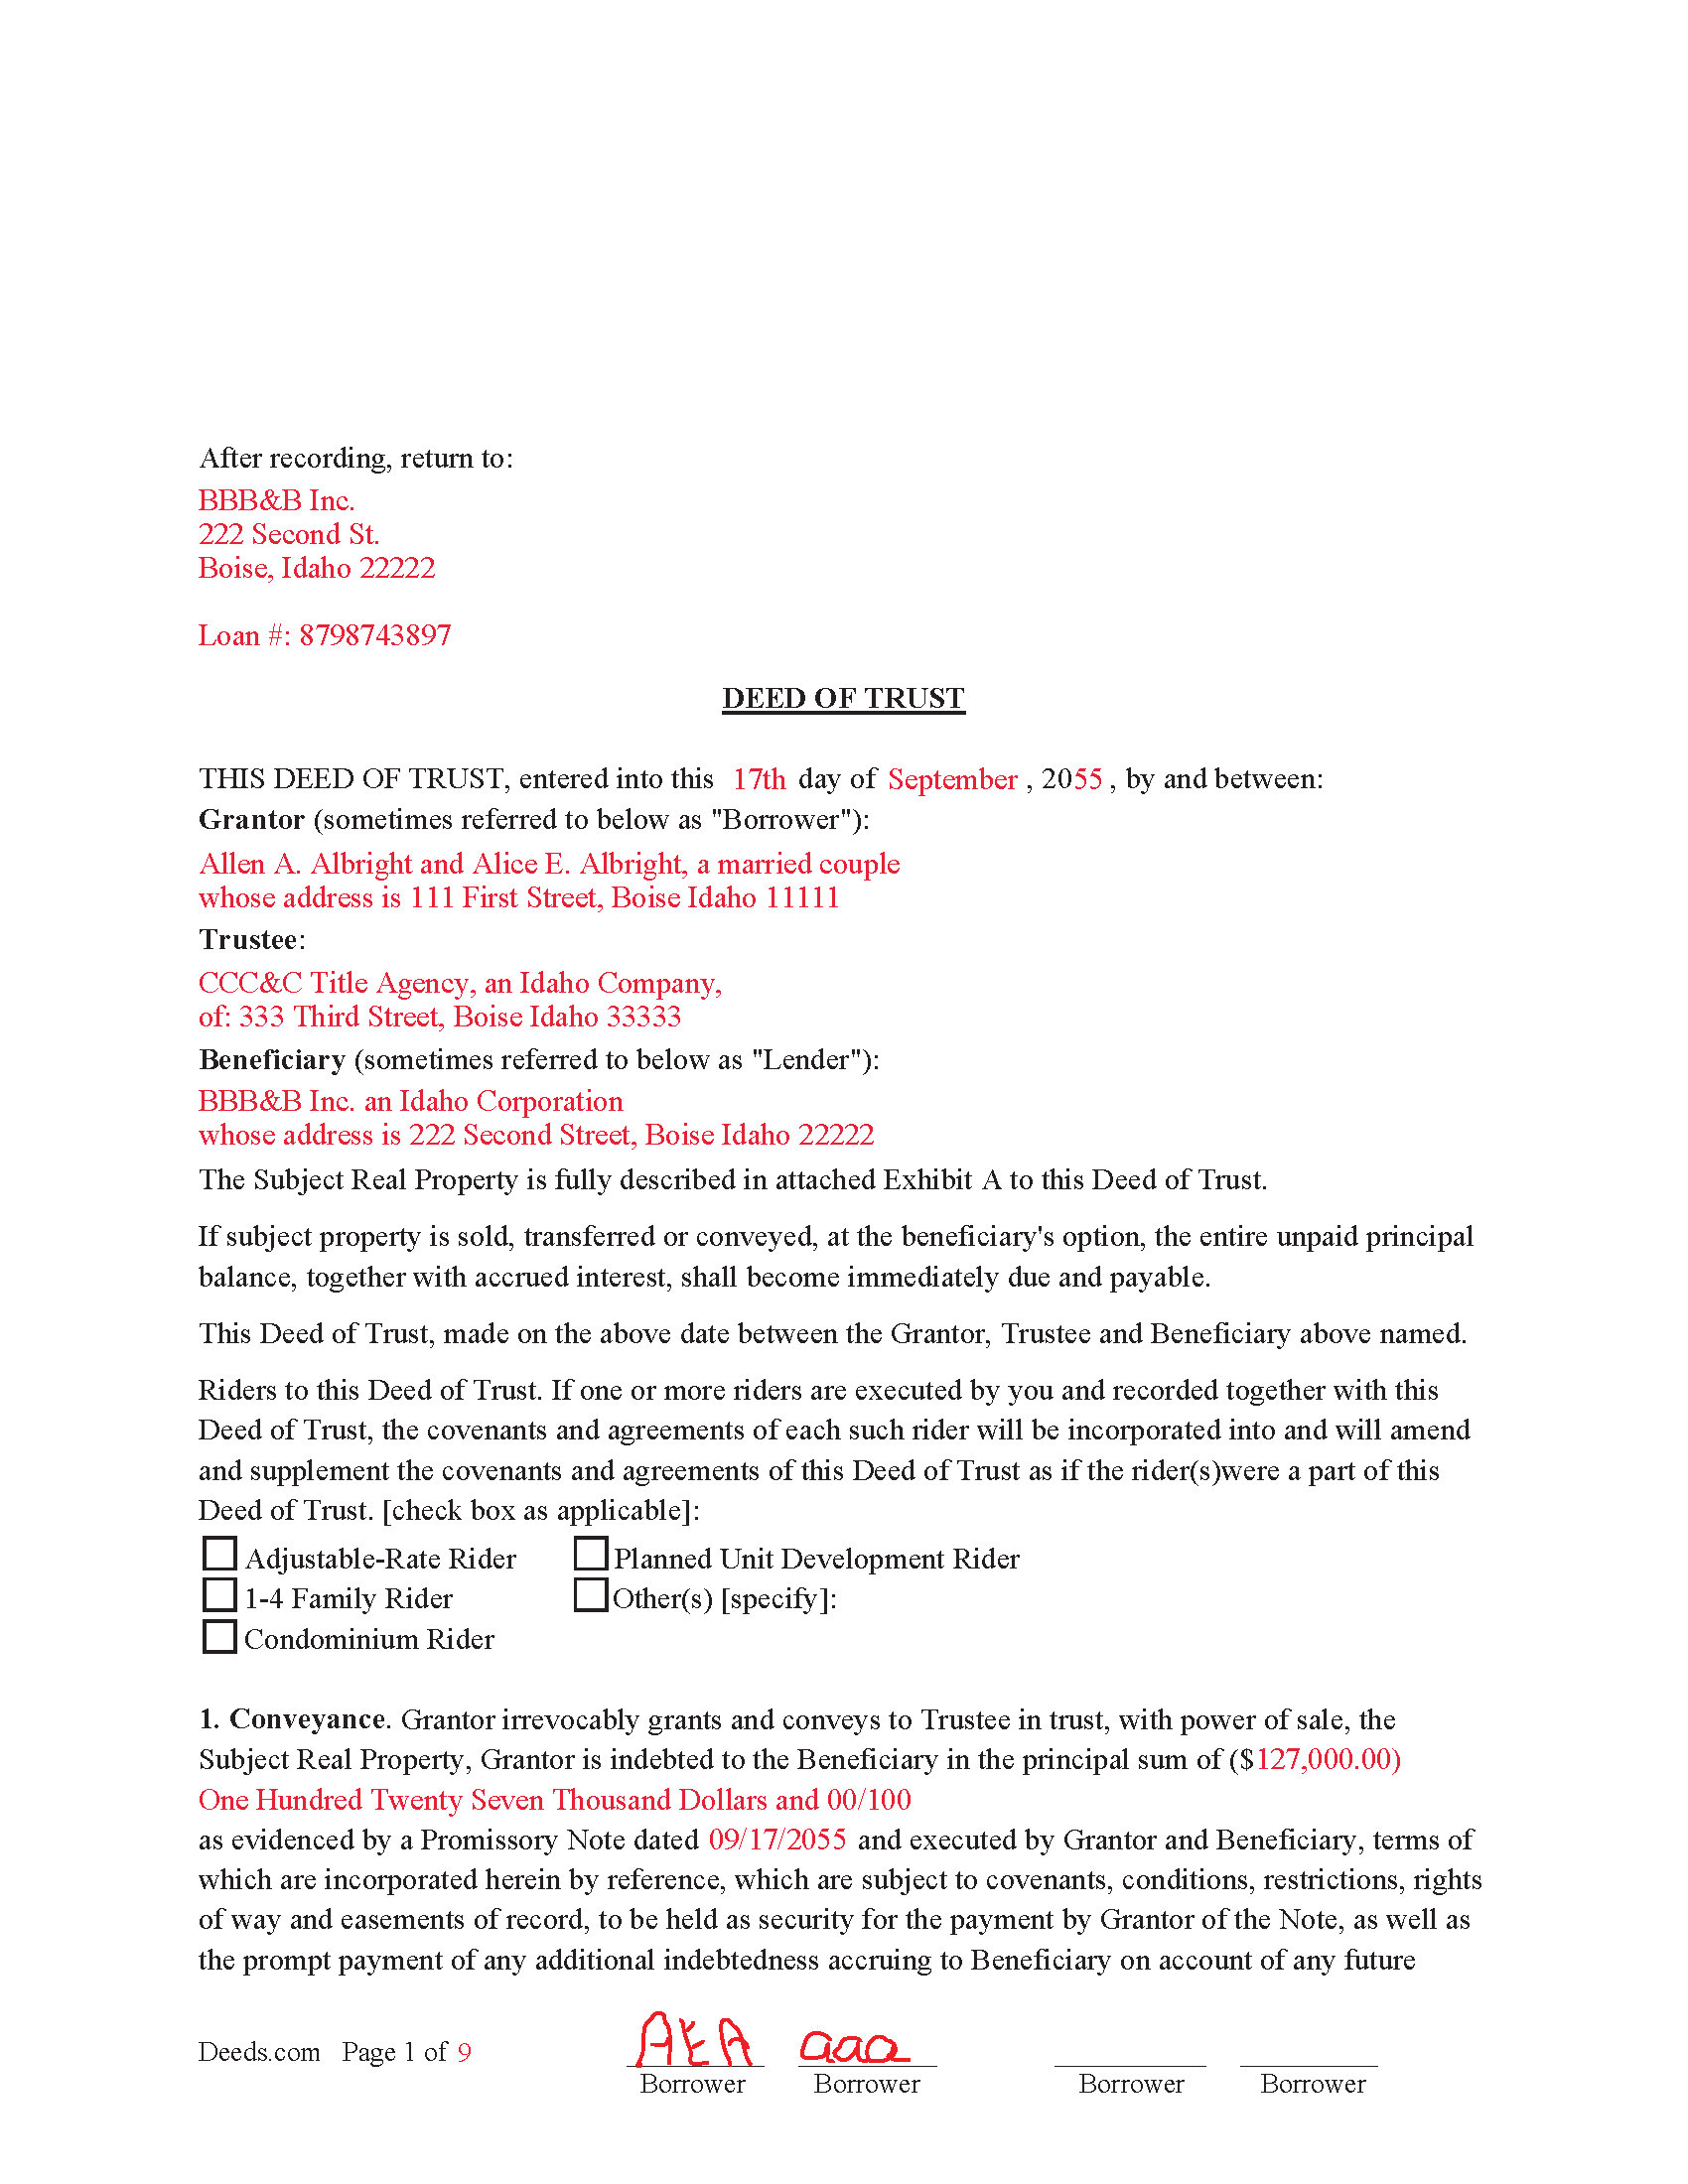 Completed Example of the Deed of Trust Form